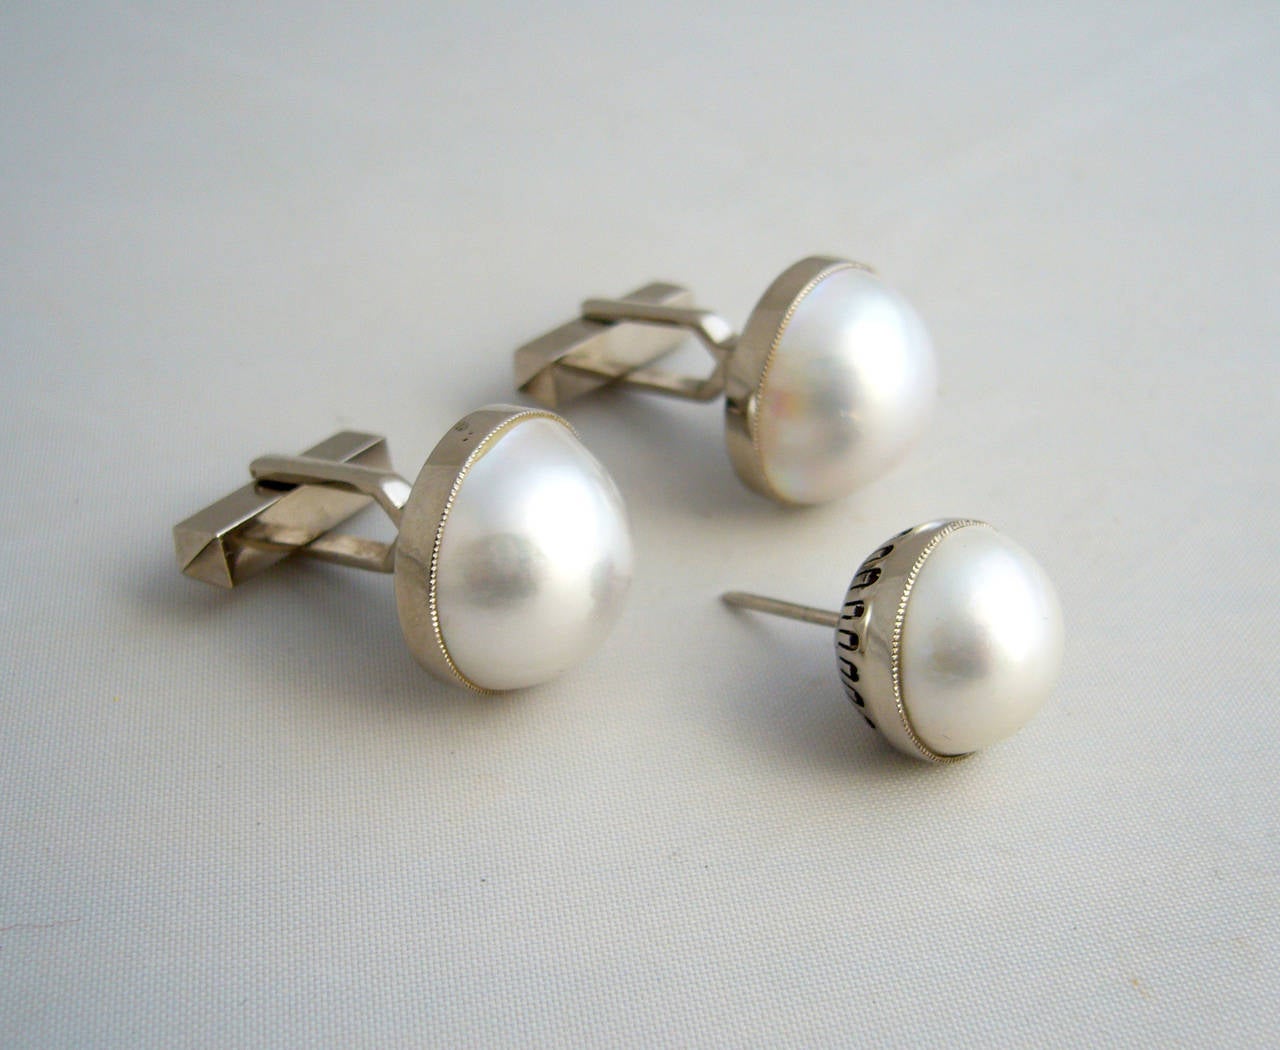 A 14k white gold and mabé pearl cufflink and tie tack set, circa 1950's.  Cufflinks measure 5/8